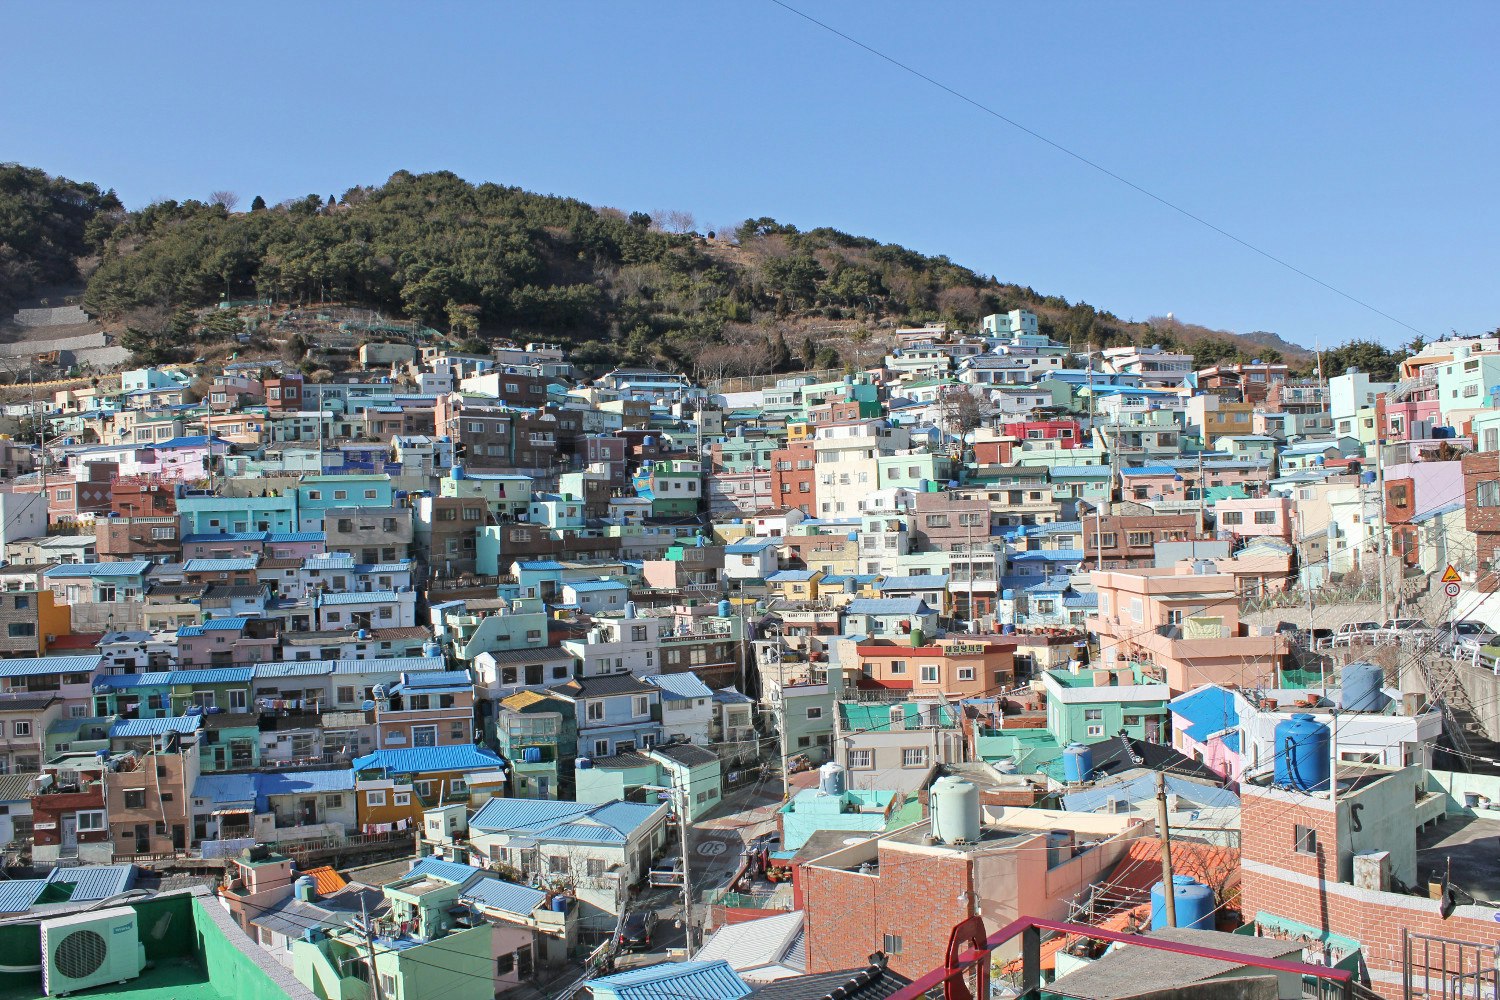 Gamcheon Culture Village: mountain-side cultural oddity. Image by Rob Whyte / Lonely Planet